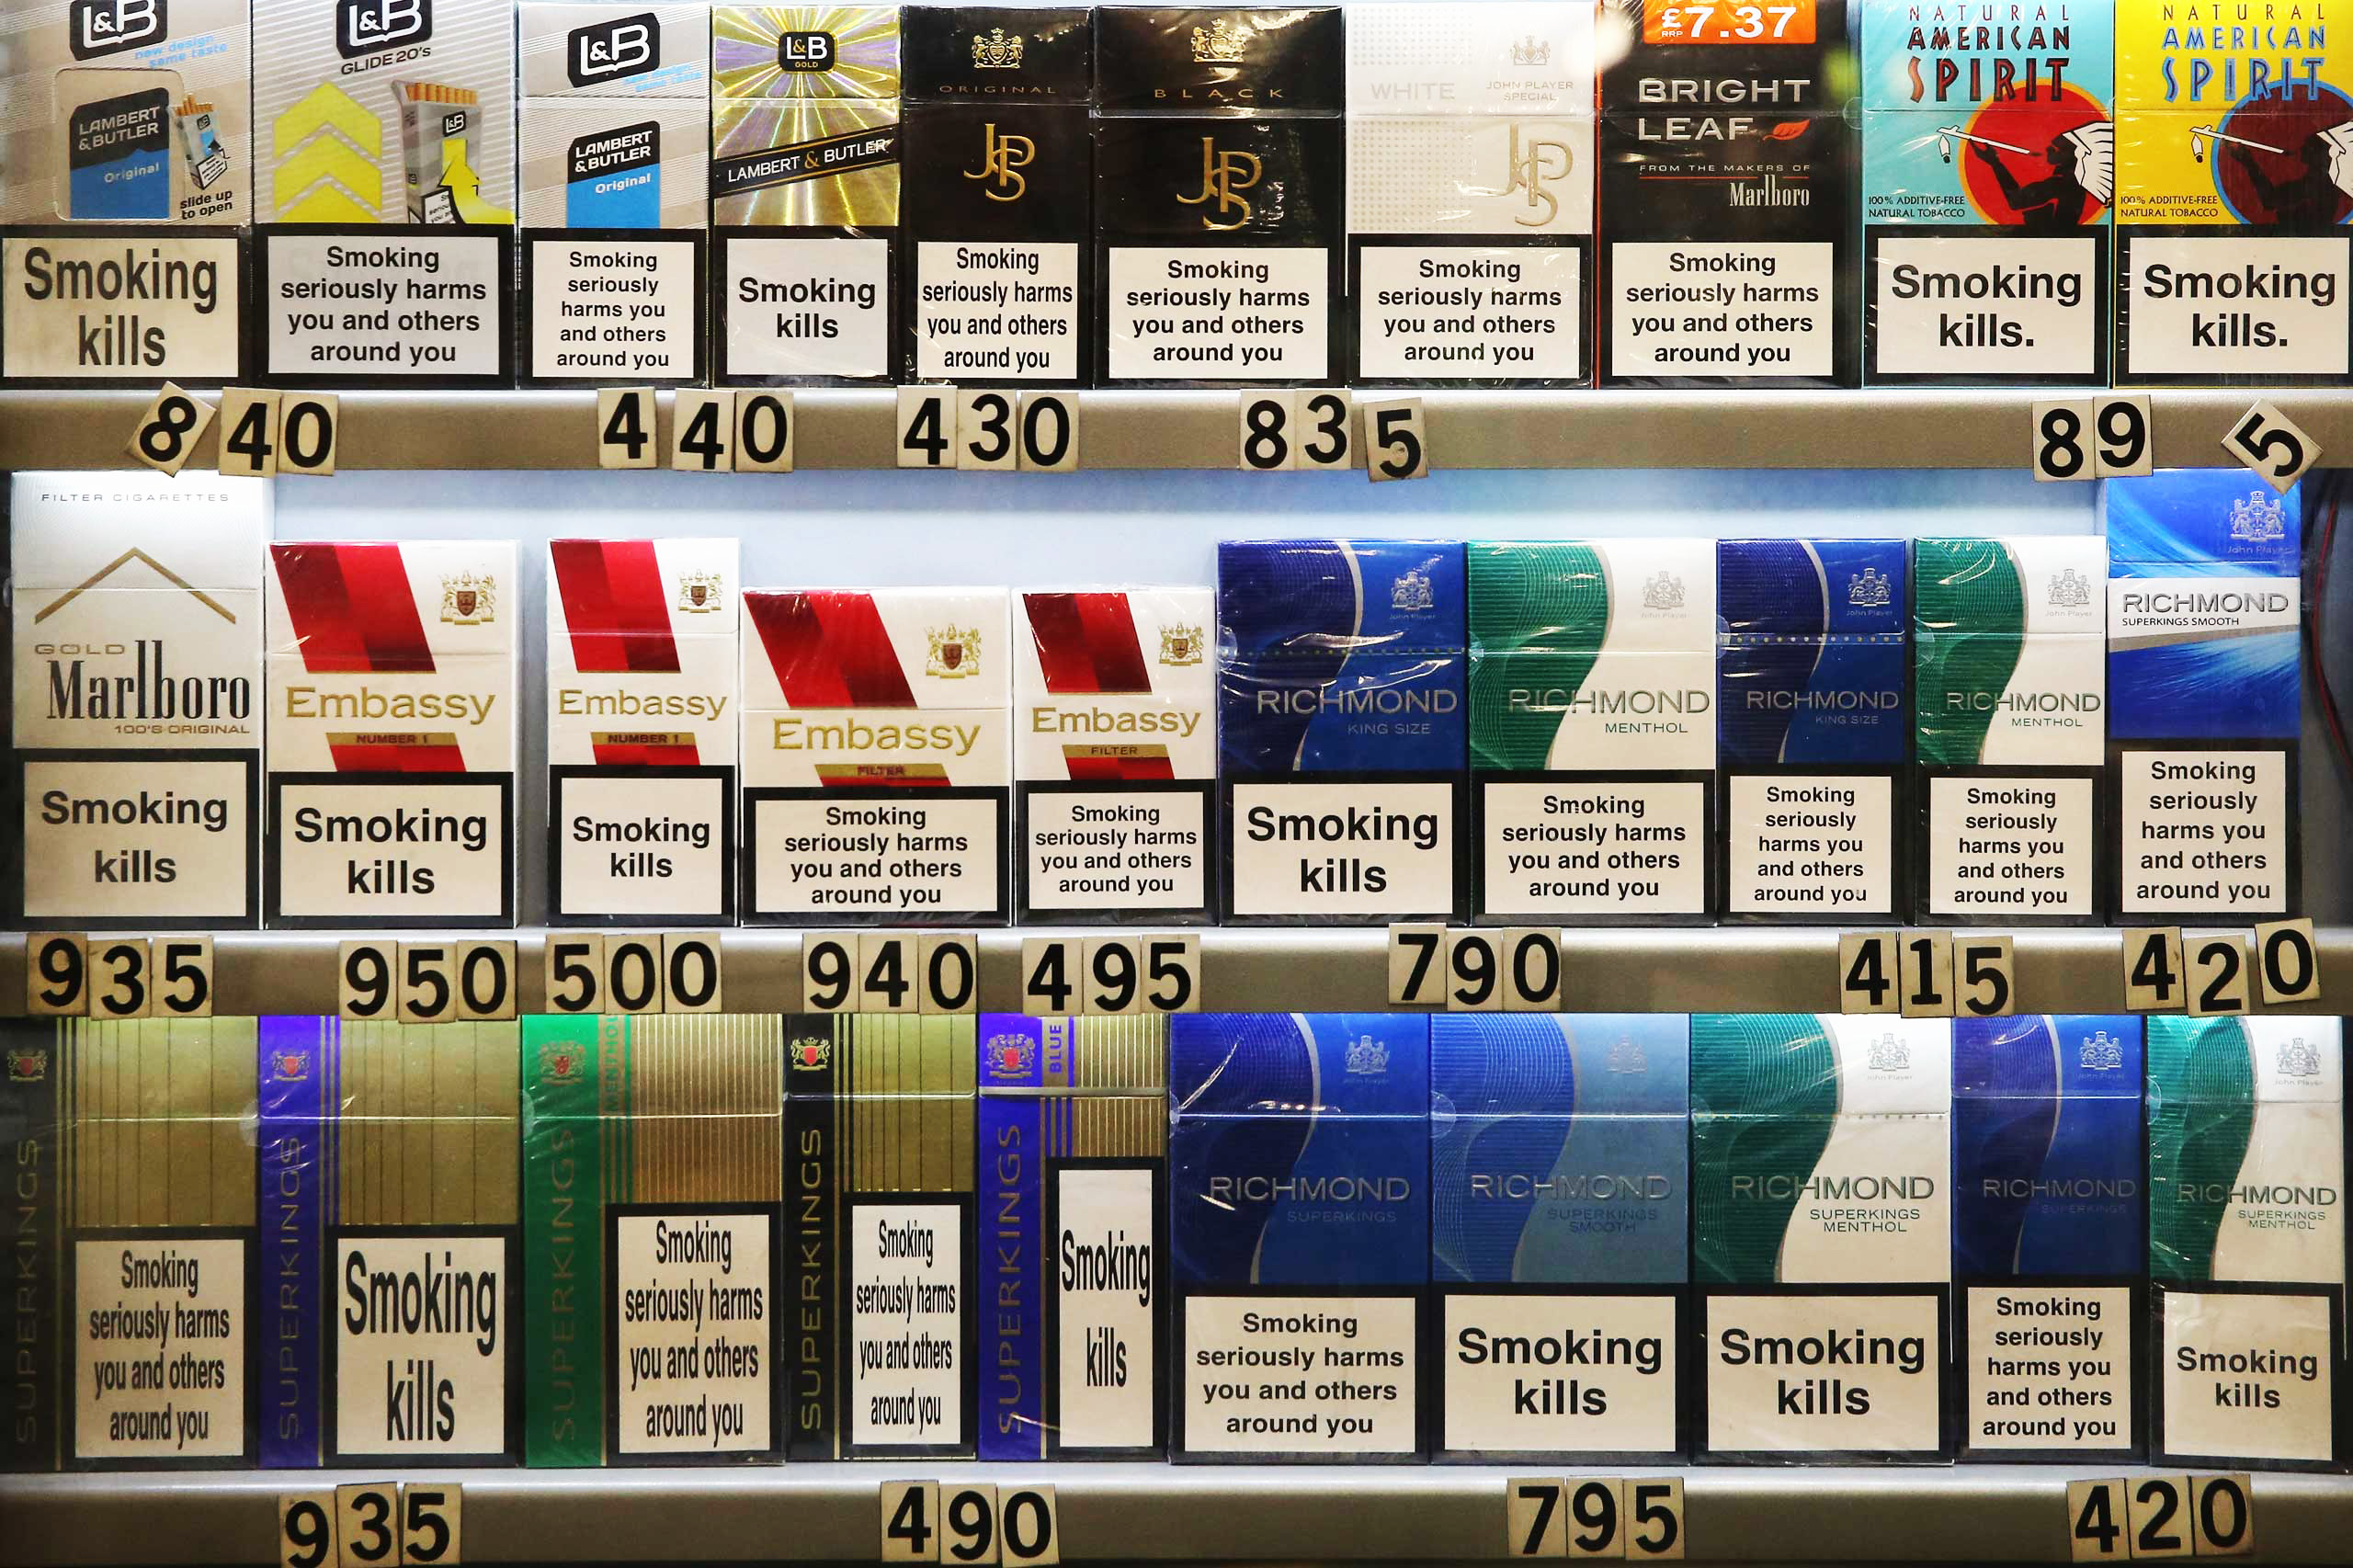 Plain Cigarette Packaging Law To Be Voted On Before The Election